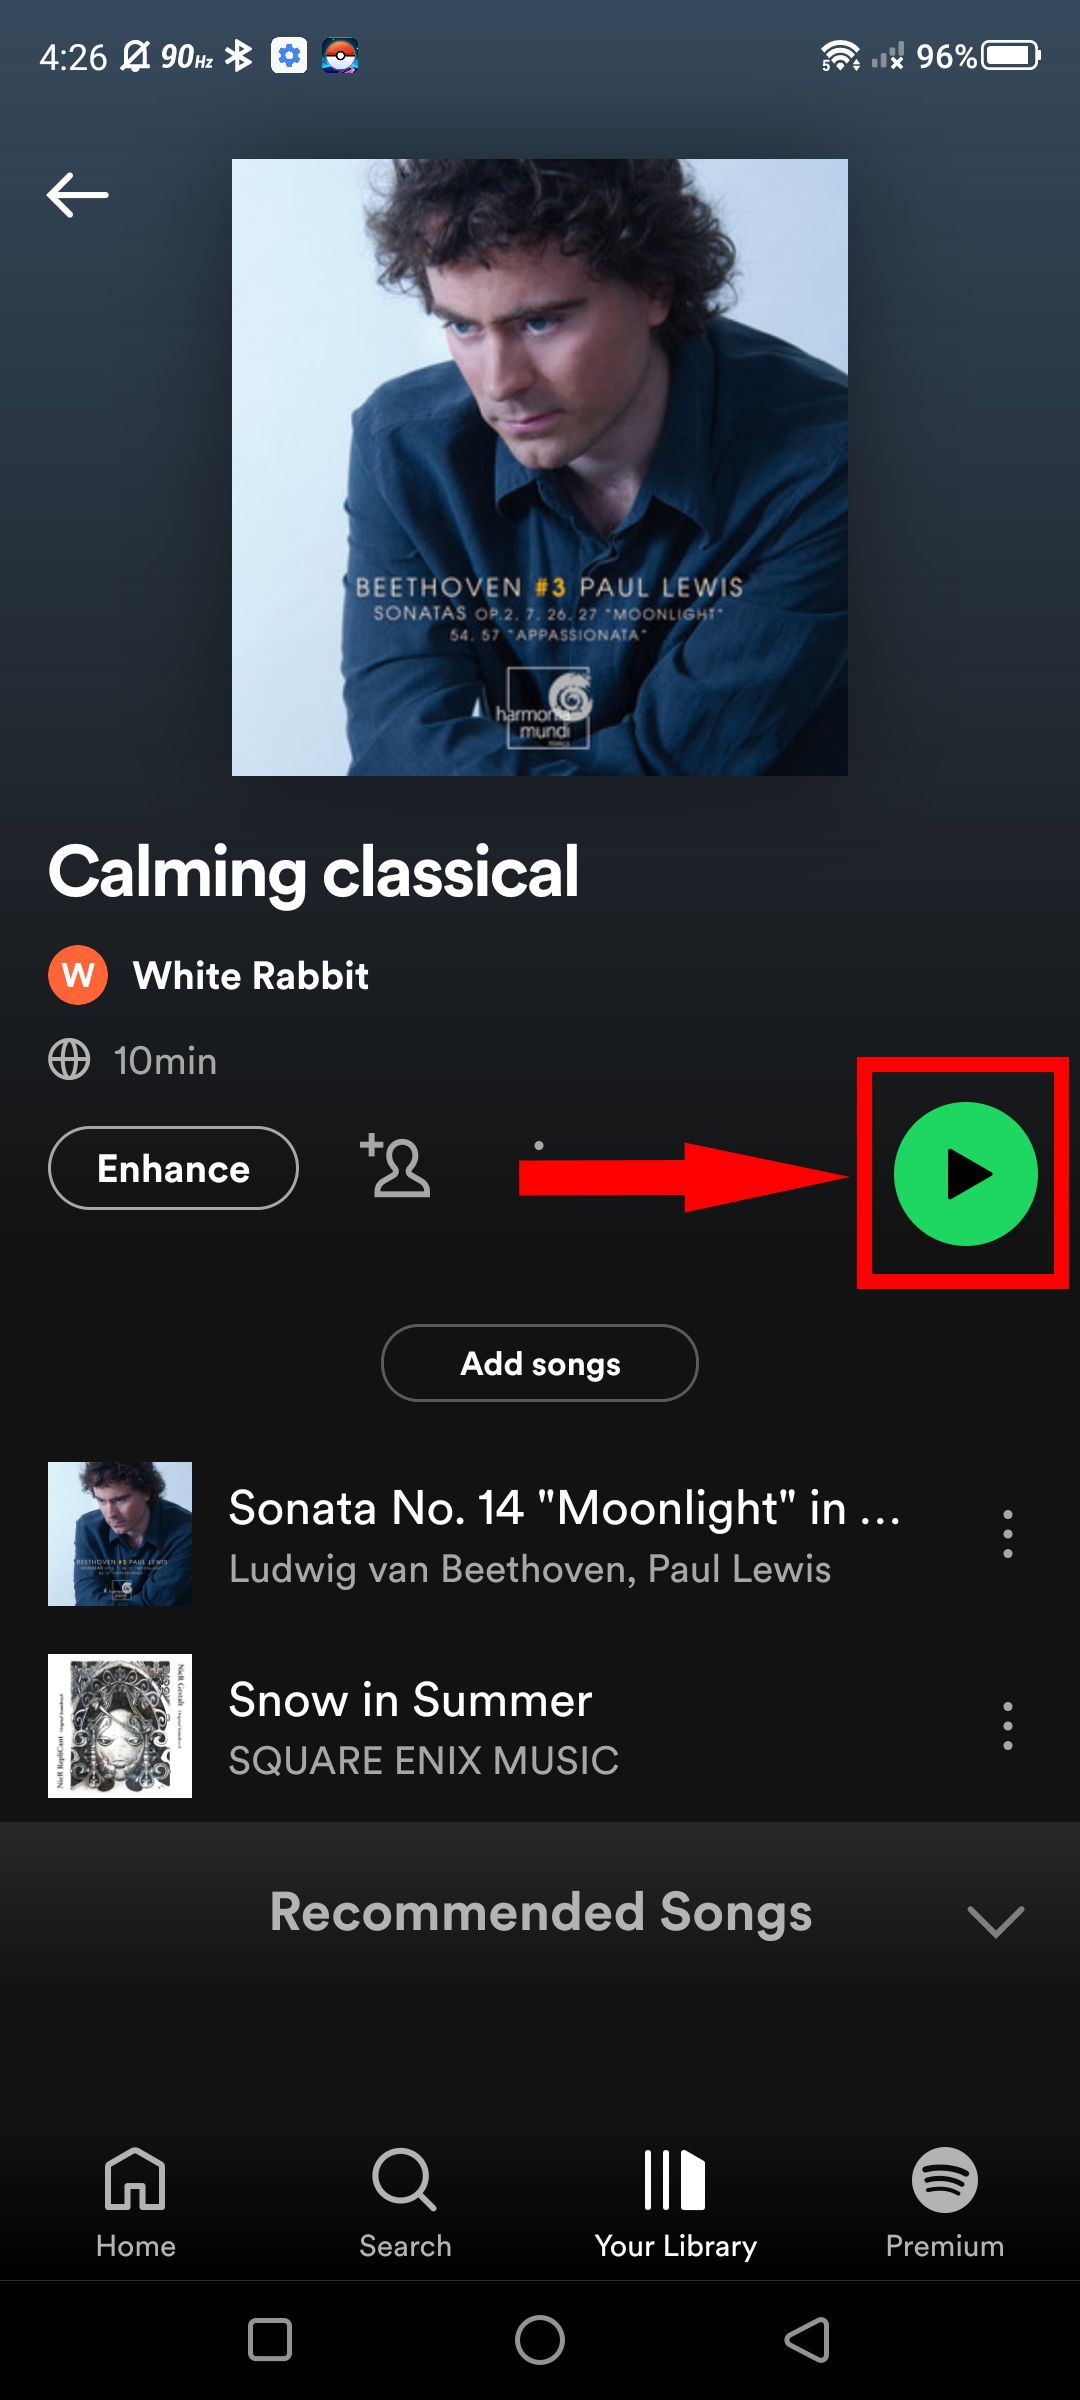 How to use Spotify on Android